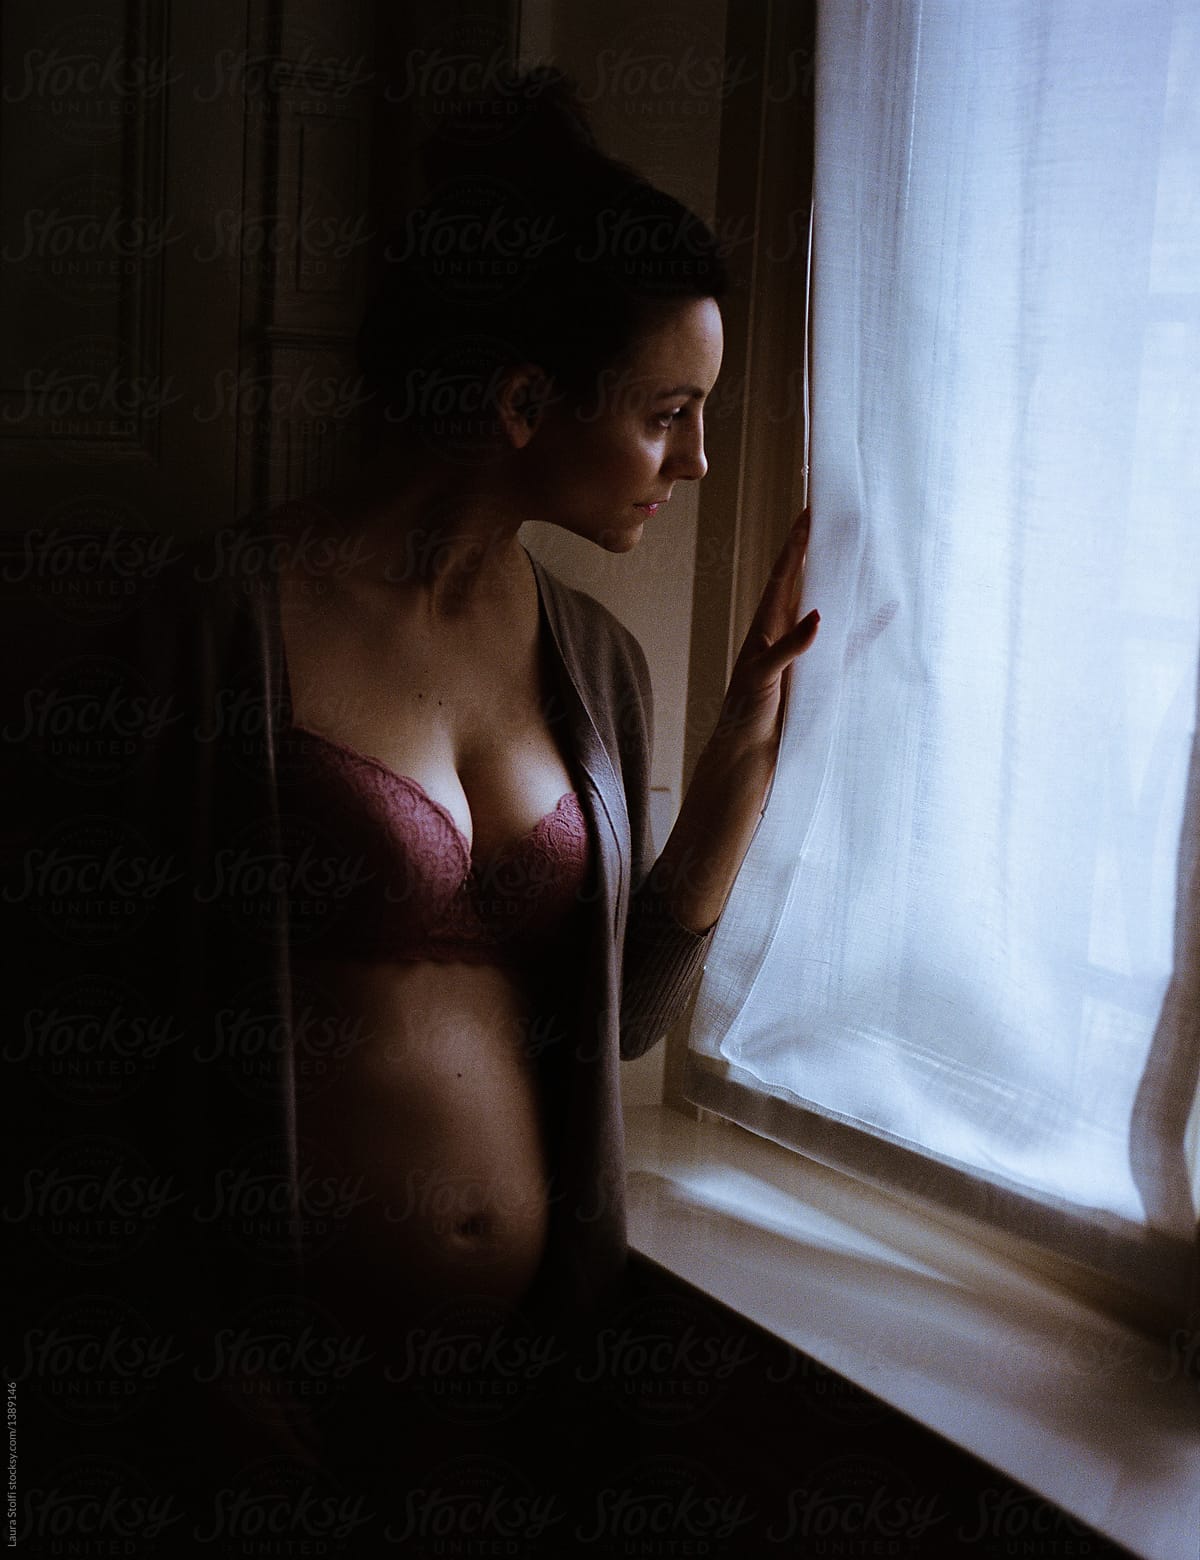 Film portrait of pregnant woman peering out of window